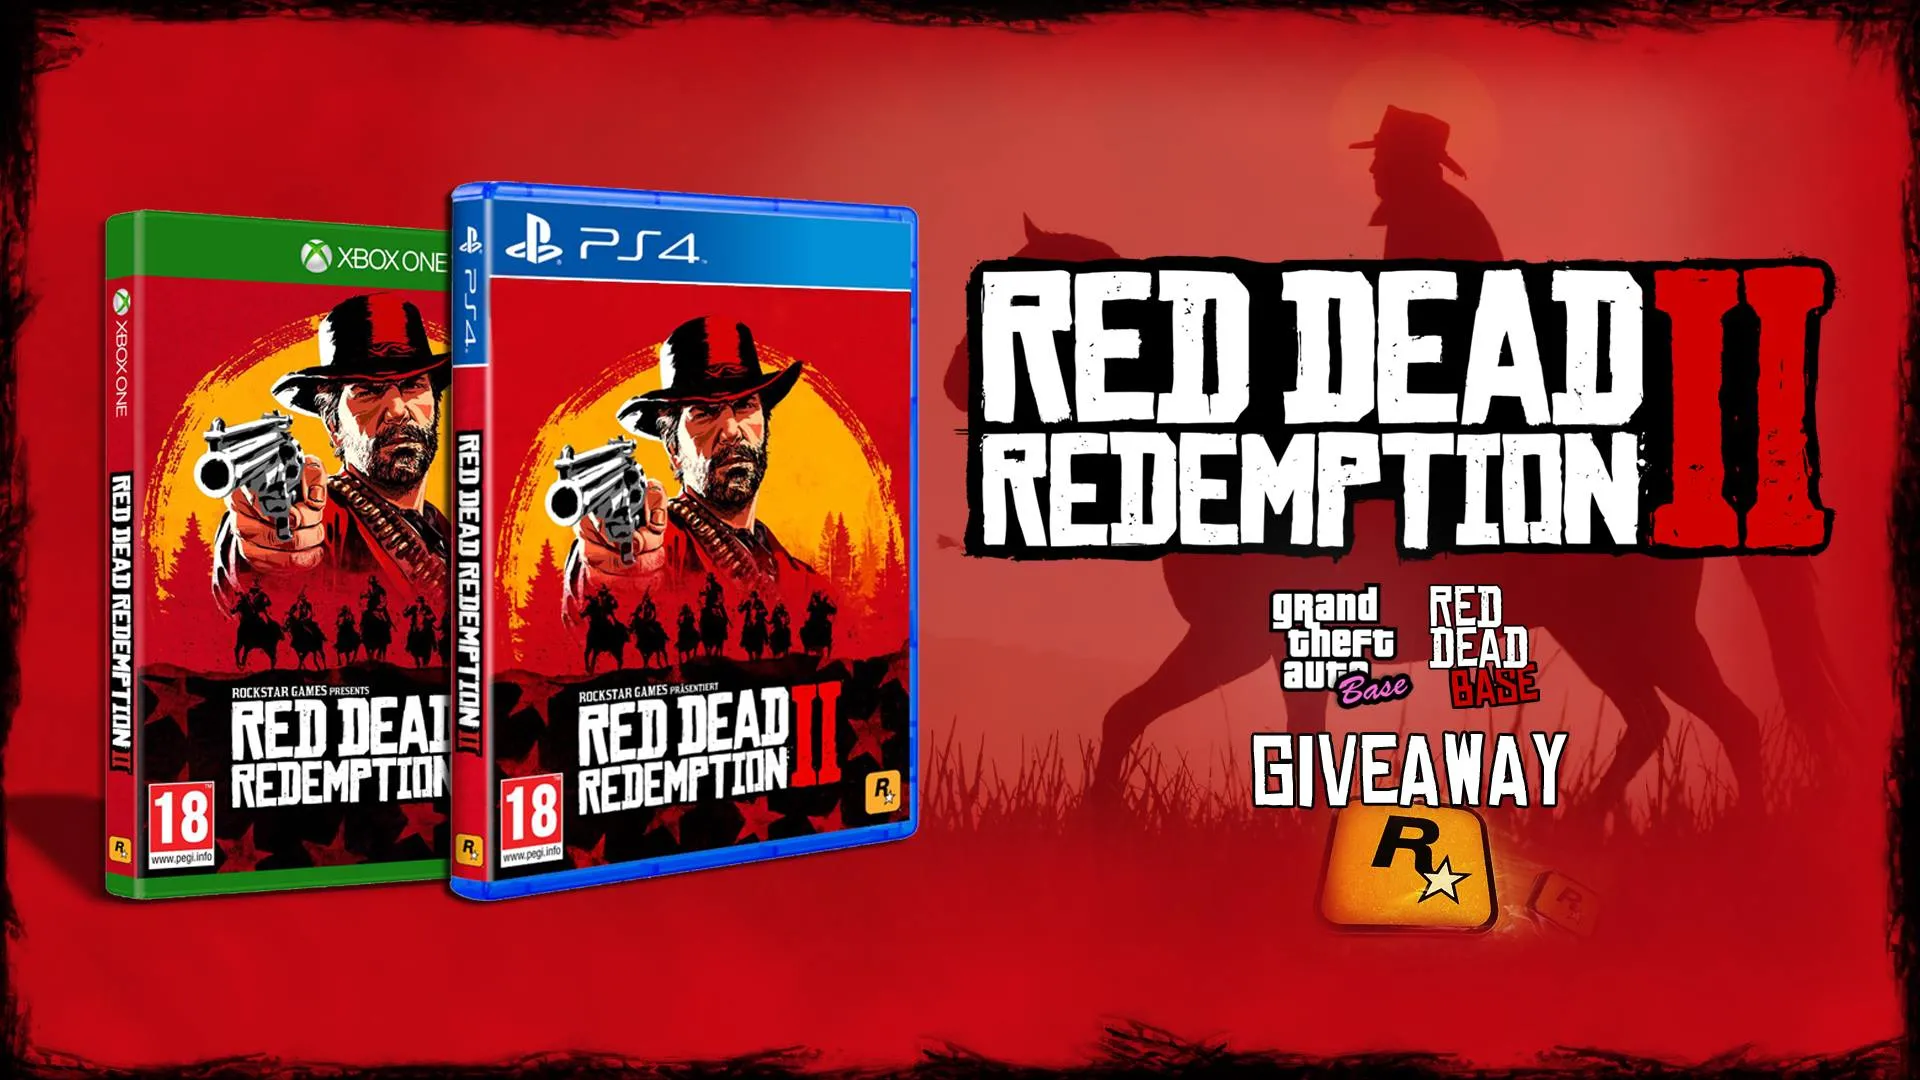 Red Dead Redemption 2 Giveaway - Win a copy for a console of your choosing!